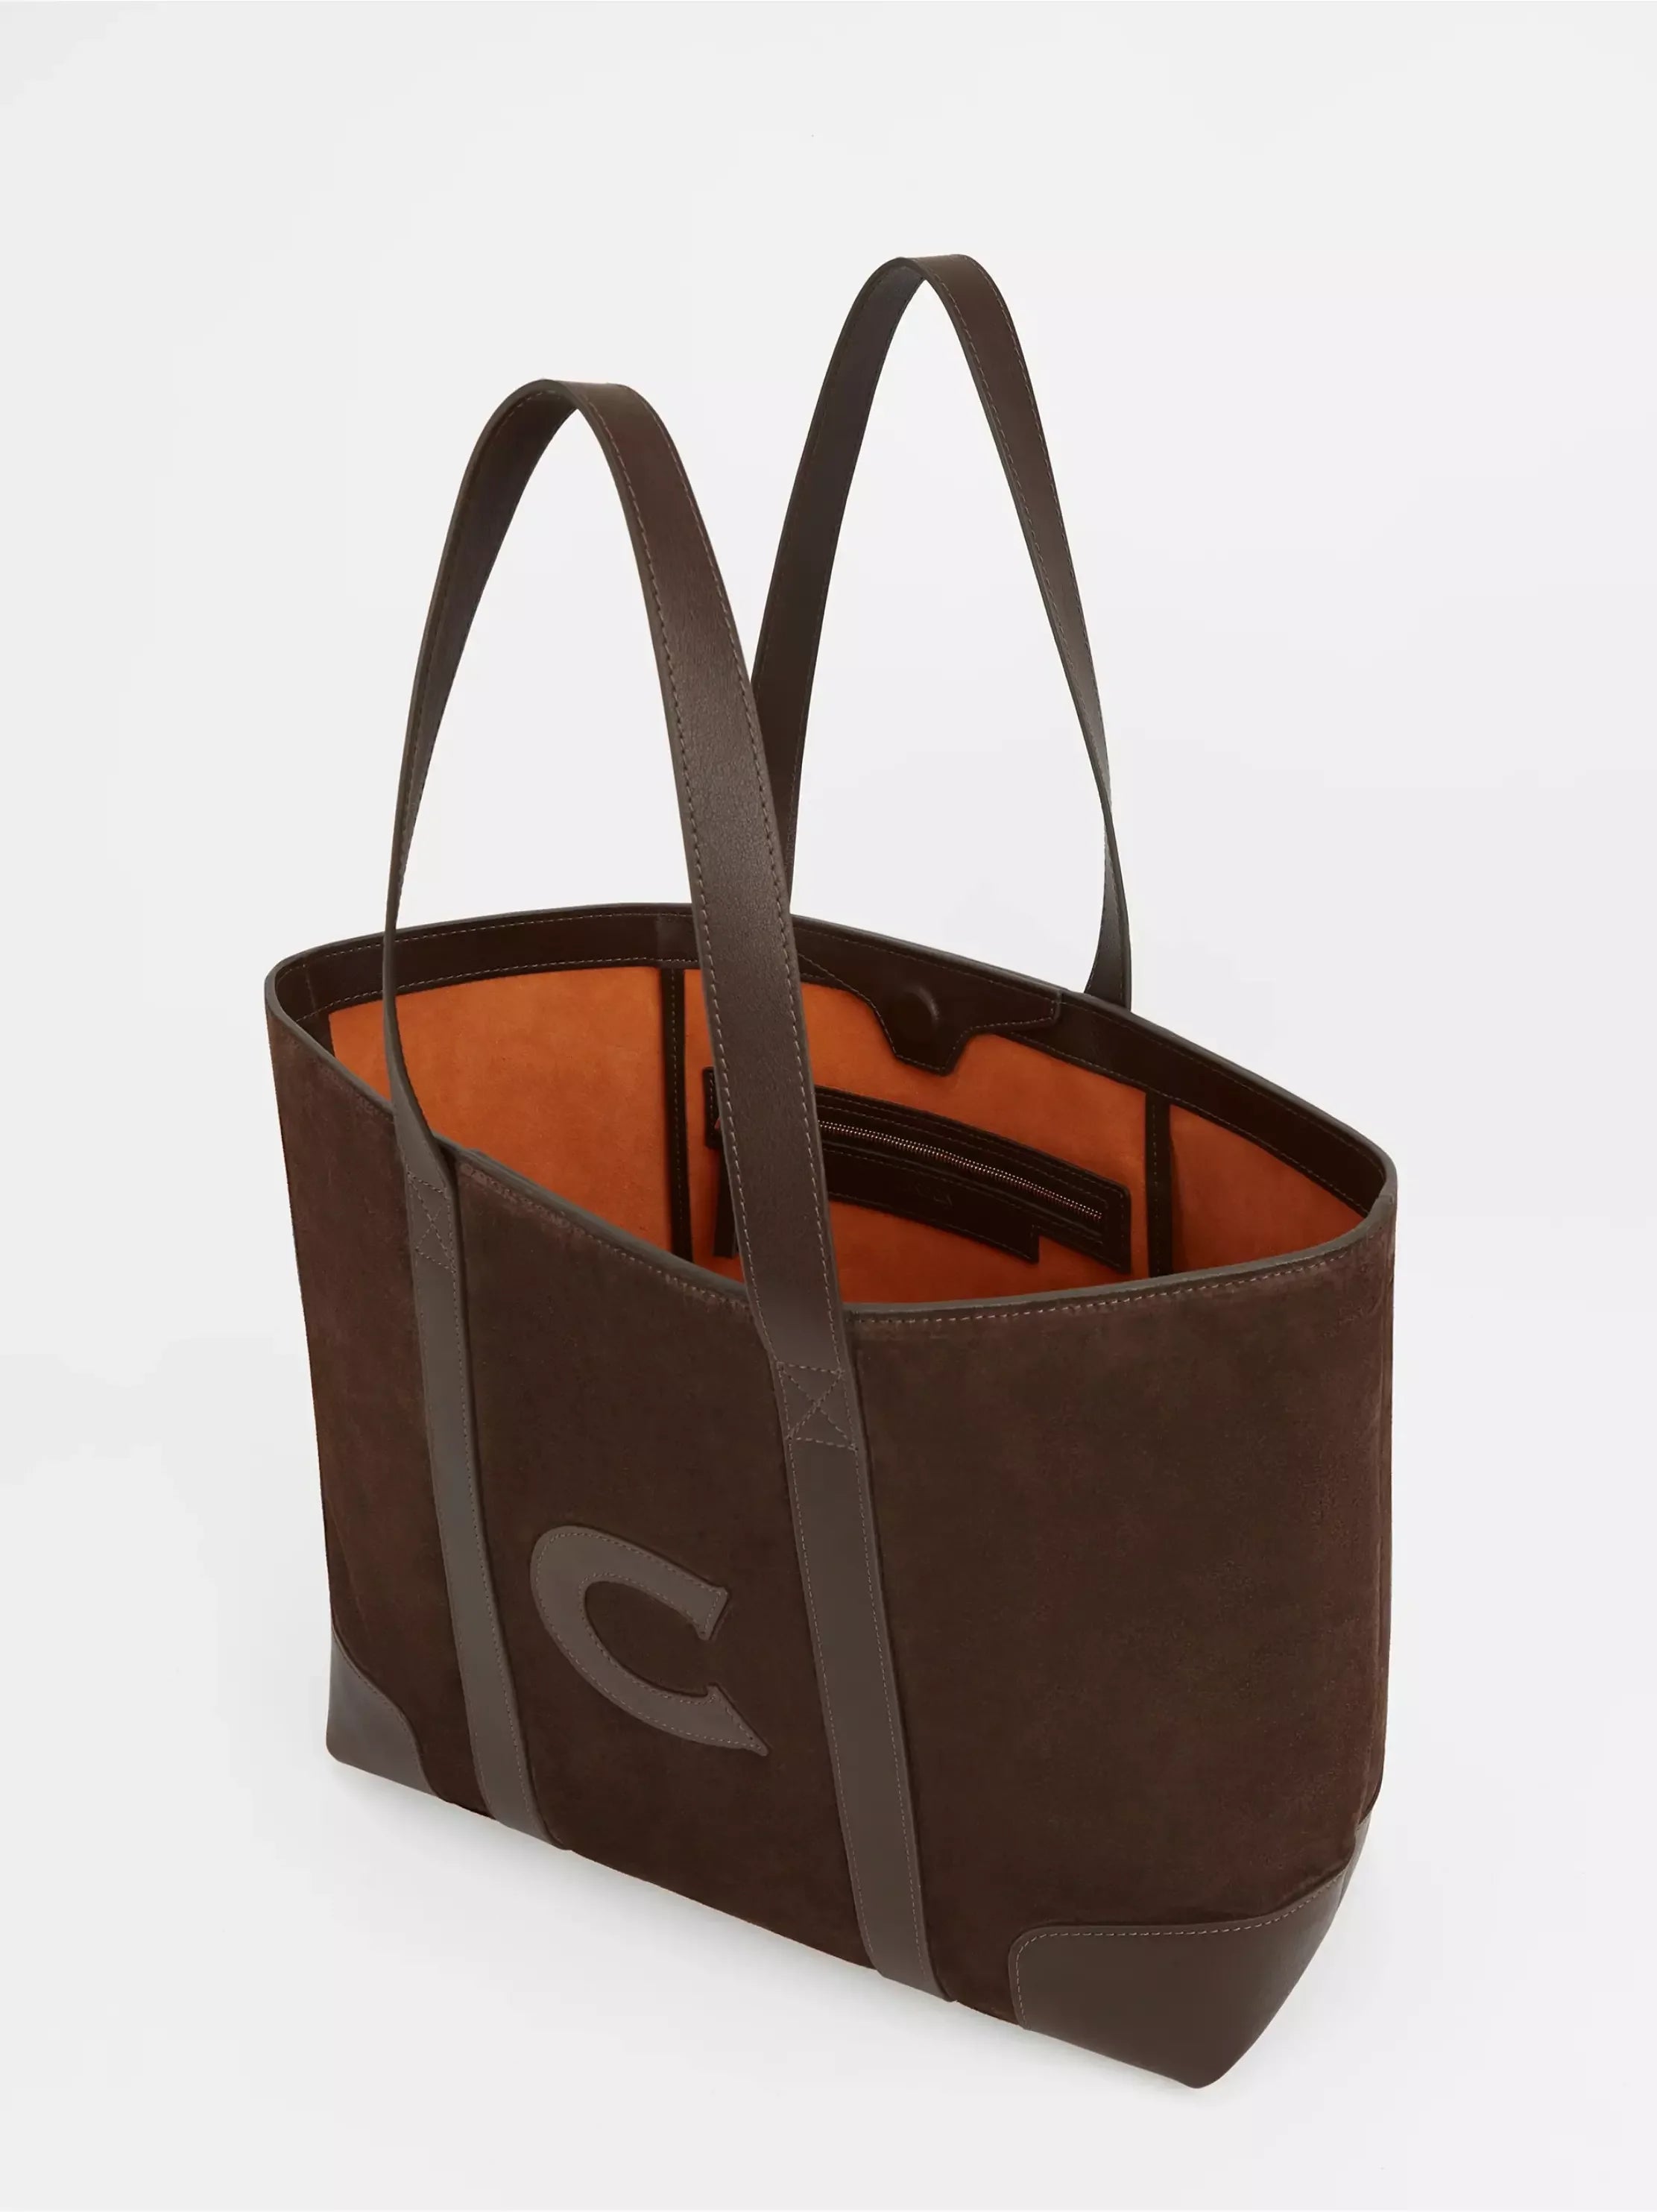 Chocolate Suede Tote